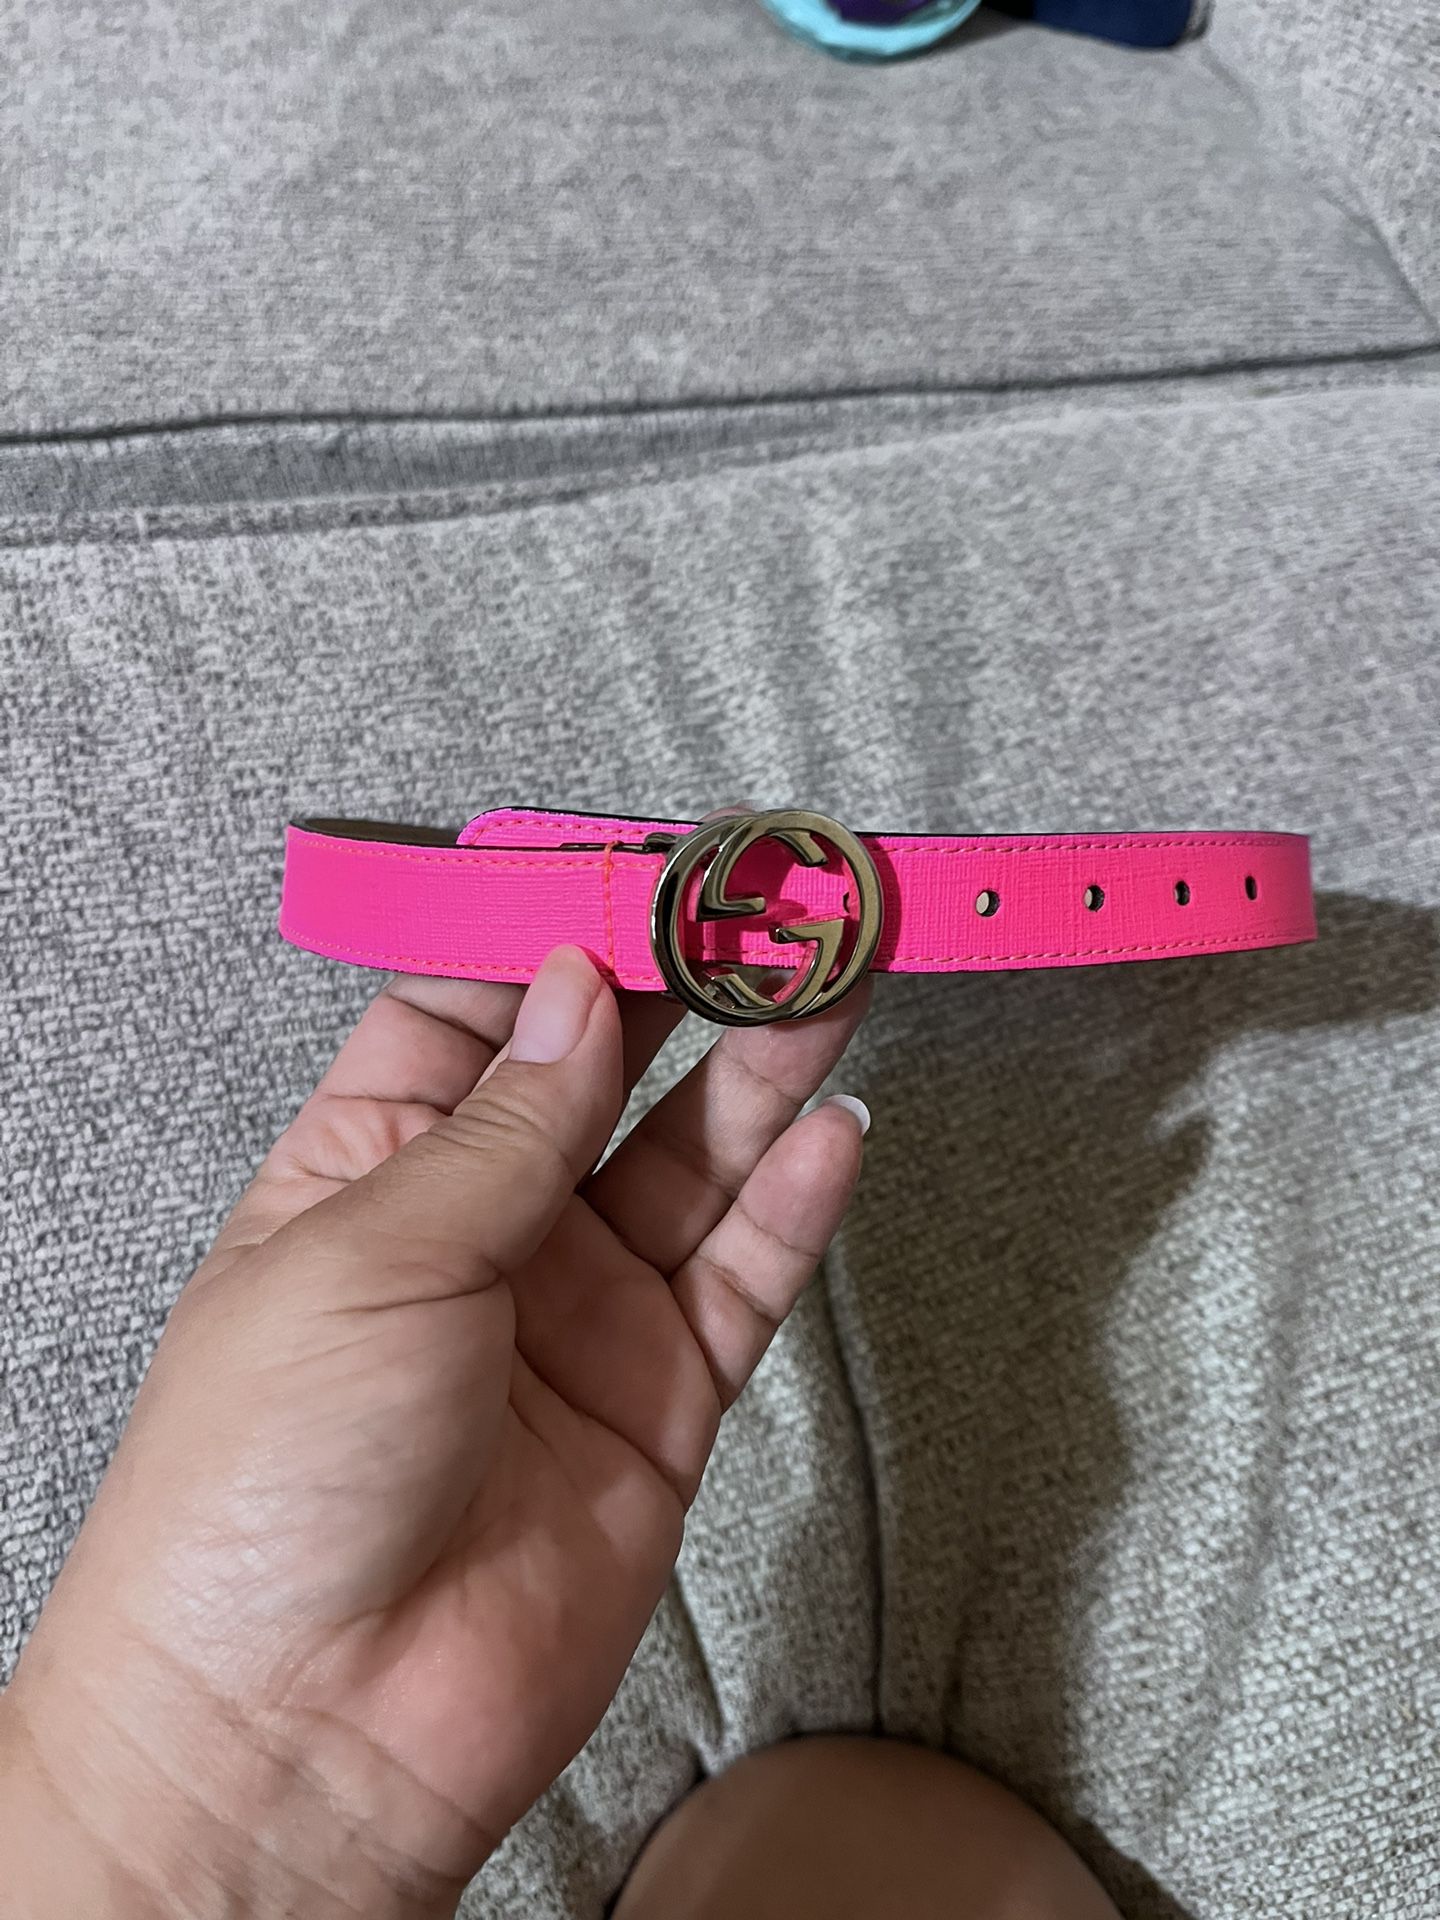 Supreme "GG" Belt in Fluorescent Pink (Gucci) “24inches”